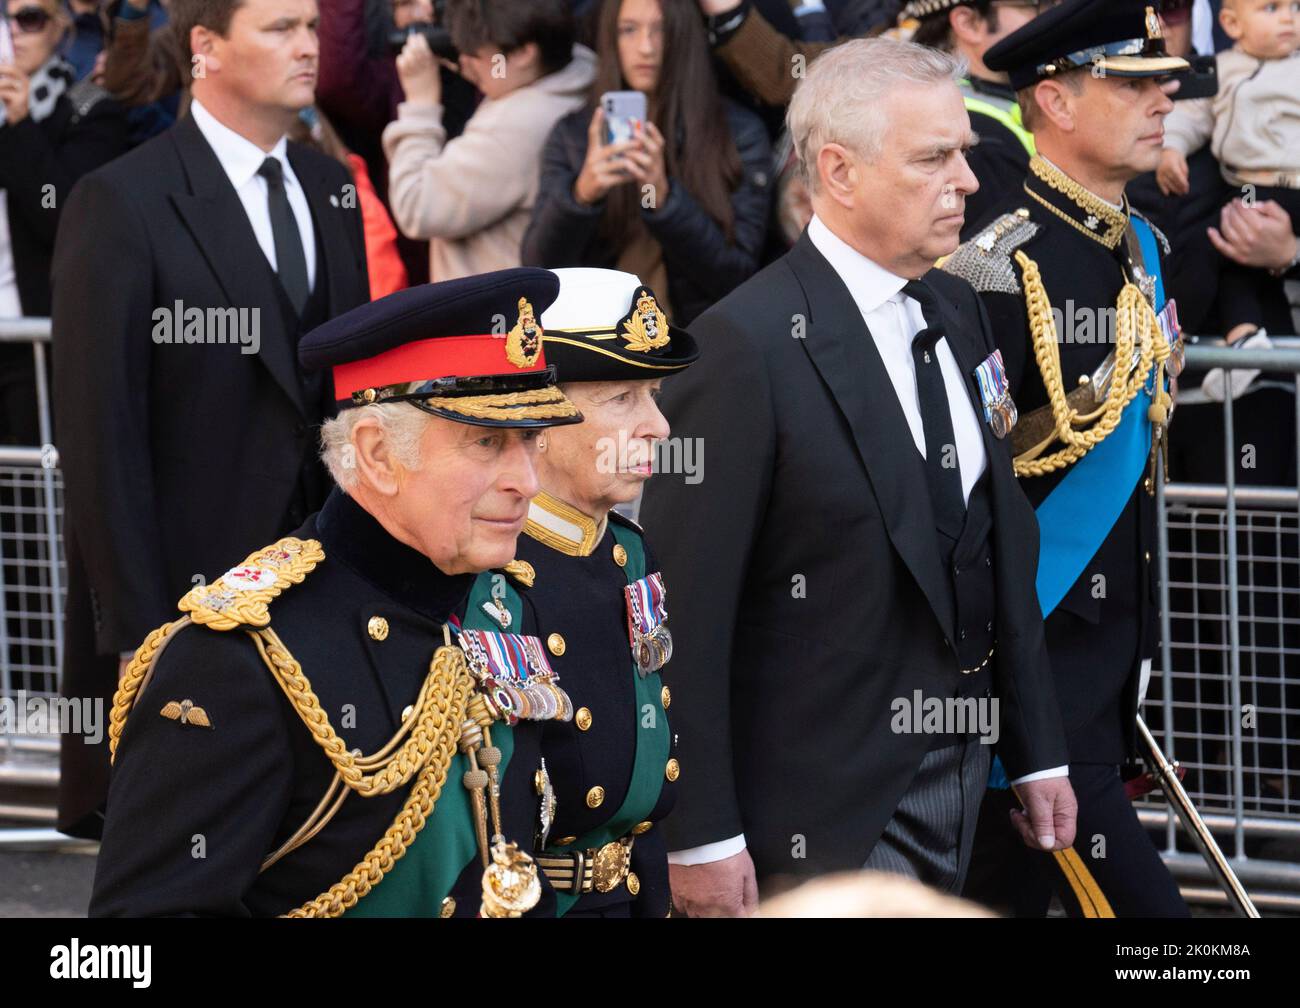 Edinburgh, Scotland, UK. 12th September 2022. King Charles III walks behind hearse carrying body of his mother Queen Elizabeth II along the Royal Mile to St Giles Cathedral in Edinburgh where she will lie to allow the public to pay respects.  Iain Masterton/Alamy Live News Stock Photo